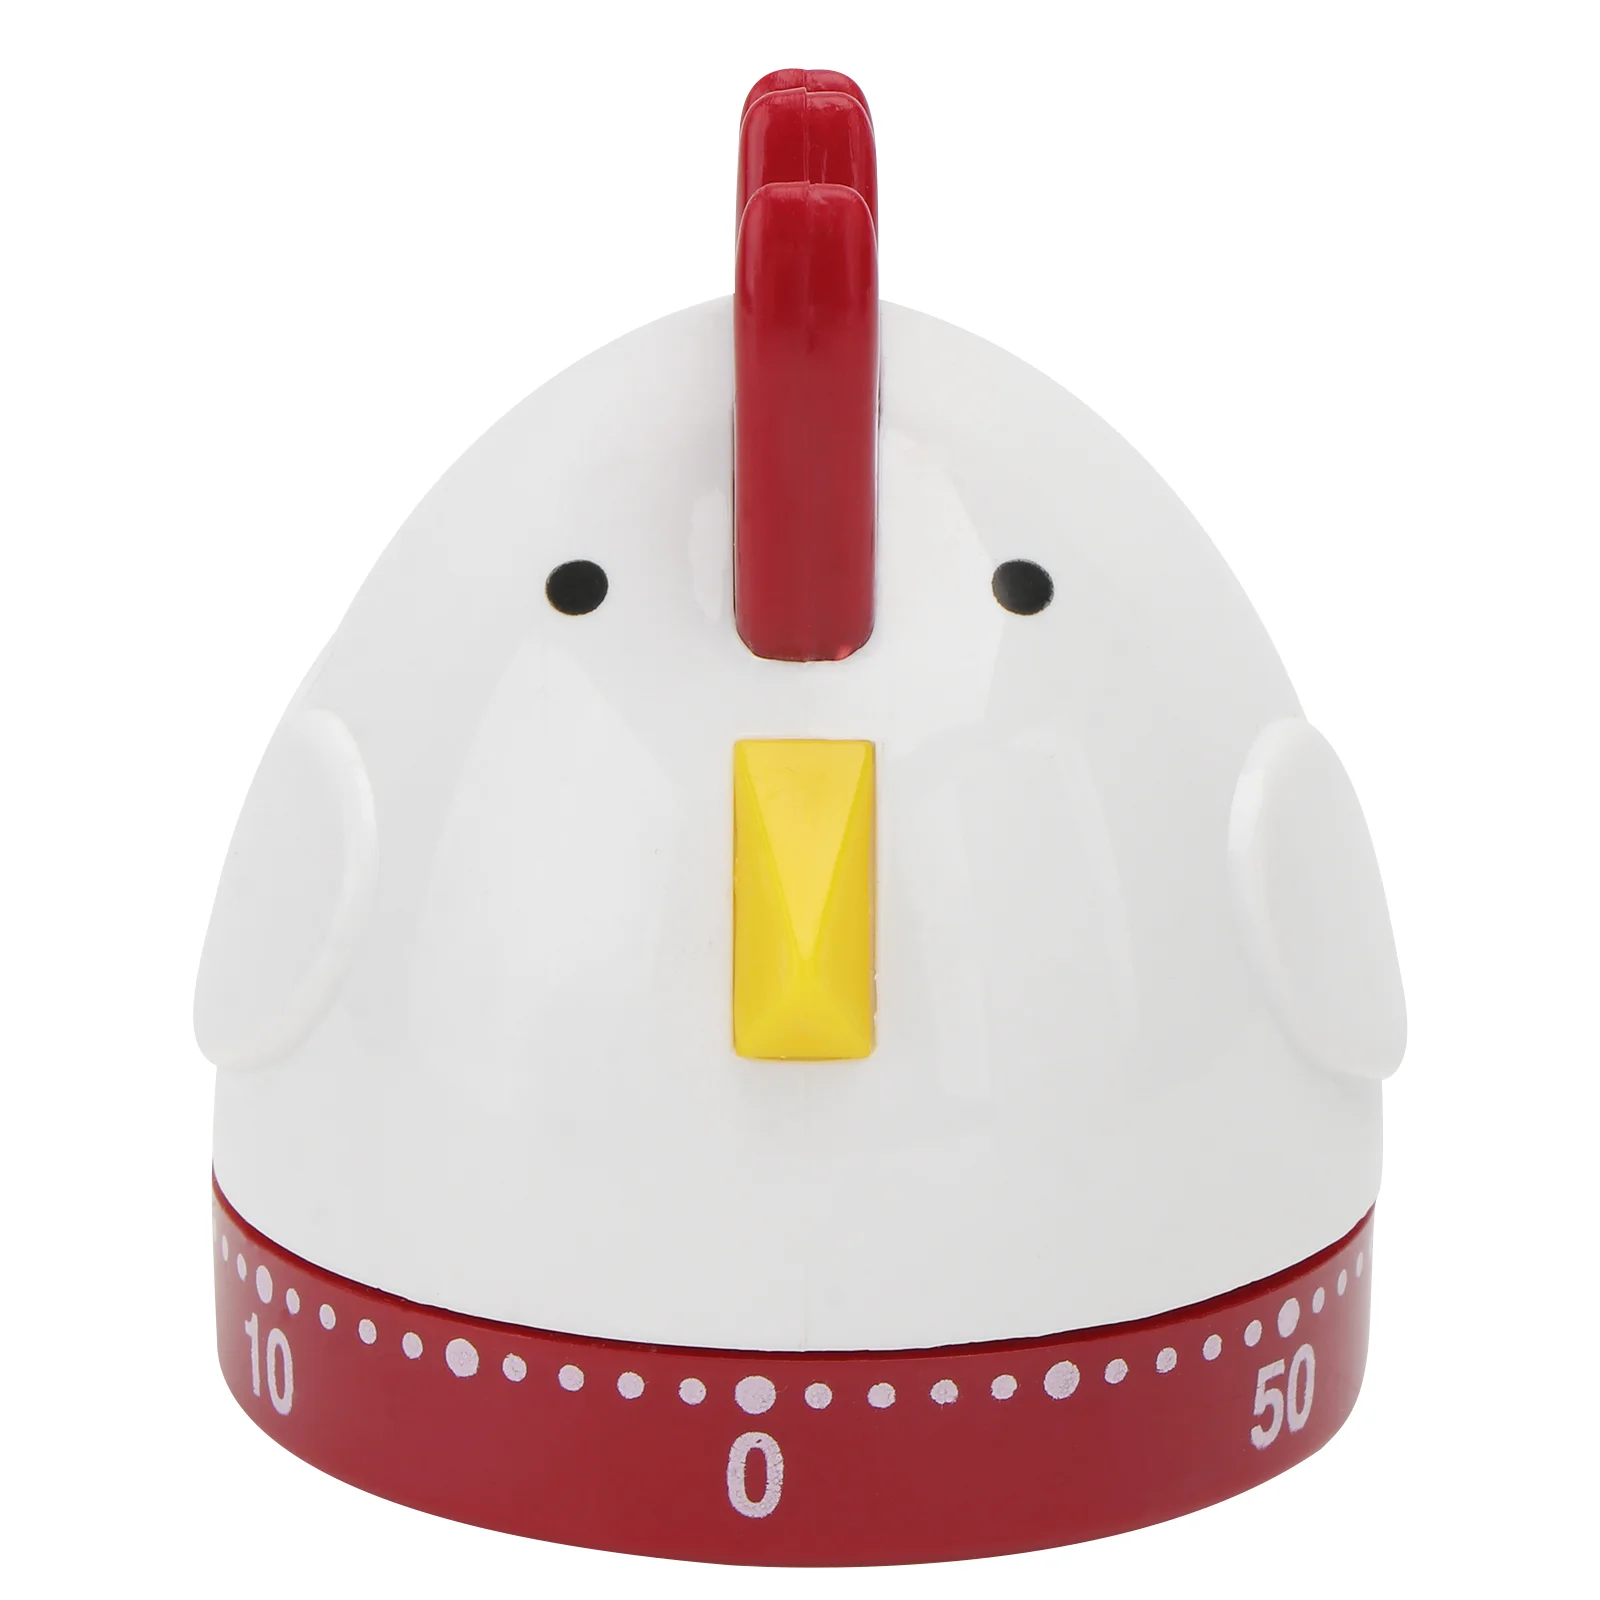 

Cock Timer Mechanical Kids Alarm Clock for Student Cooking Timers Learning Animal Cartoon Rooster Baking